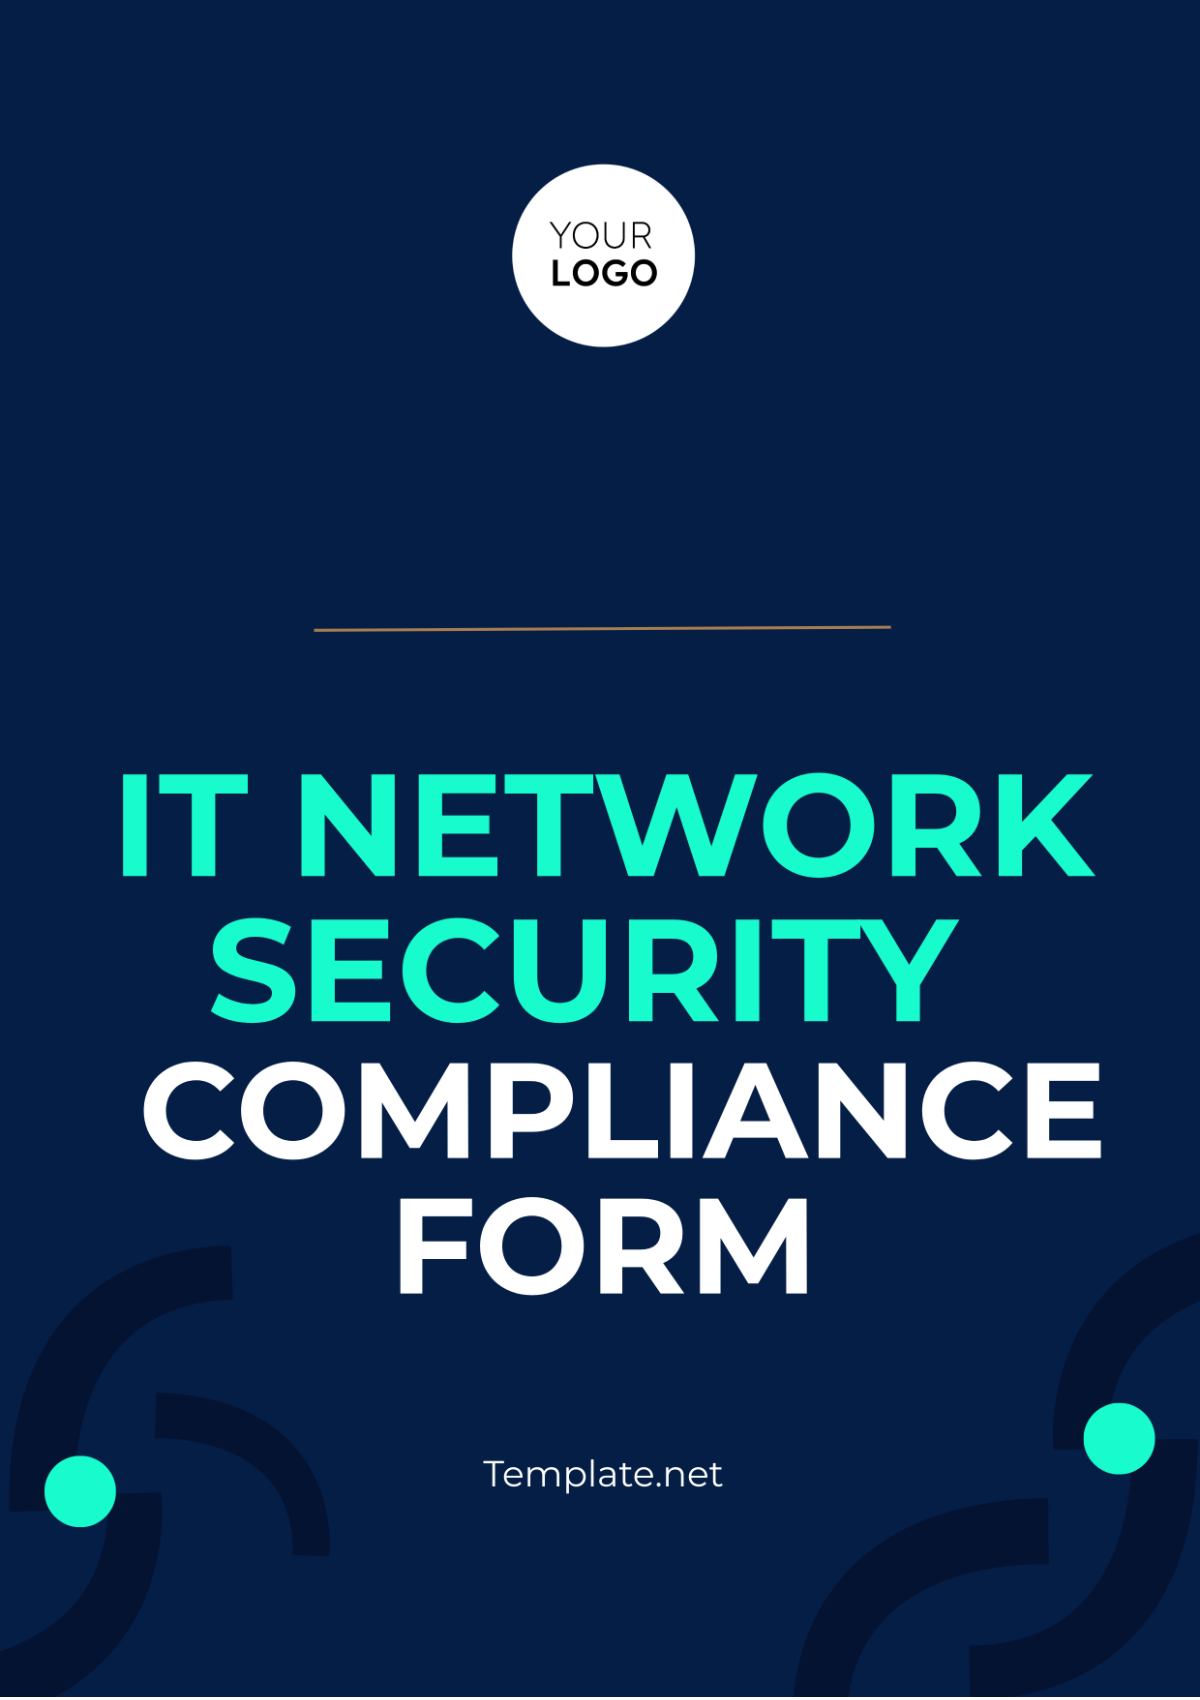 Free IT Network Security Compliance Form Template